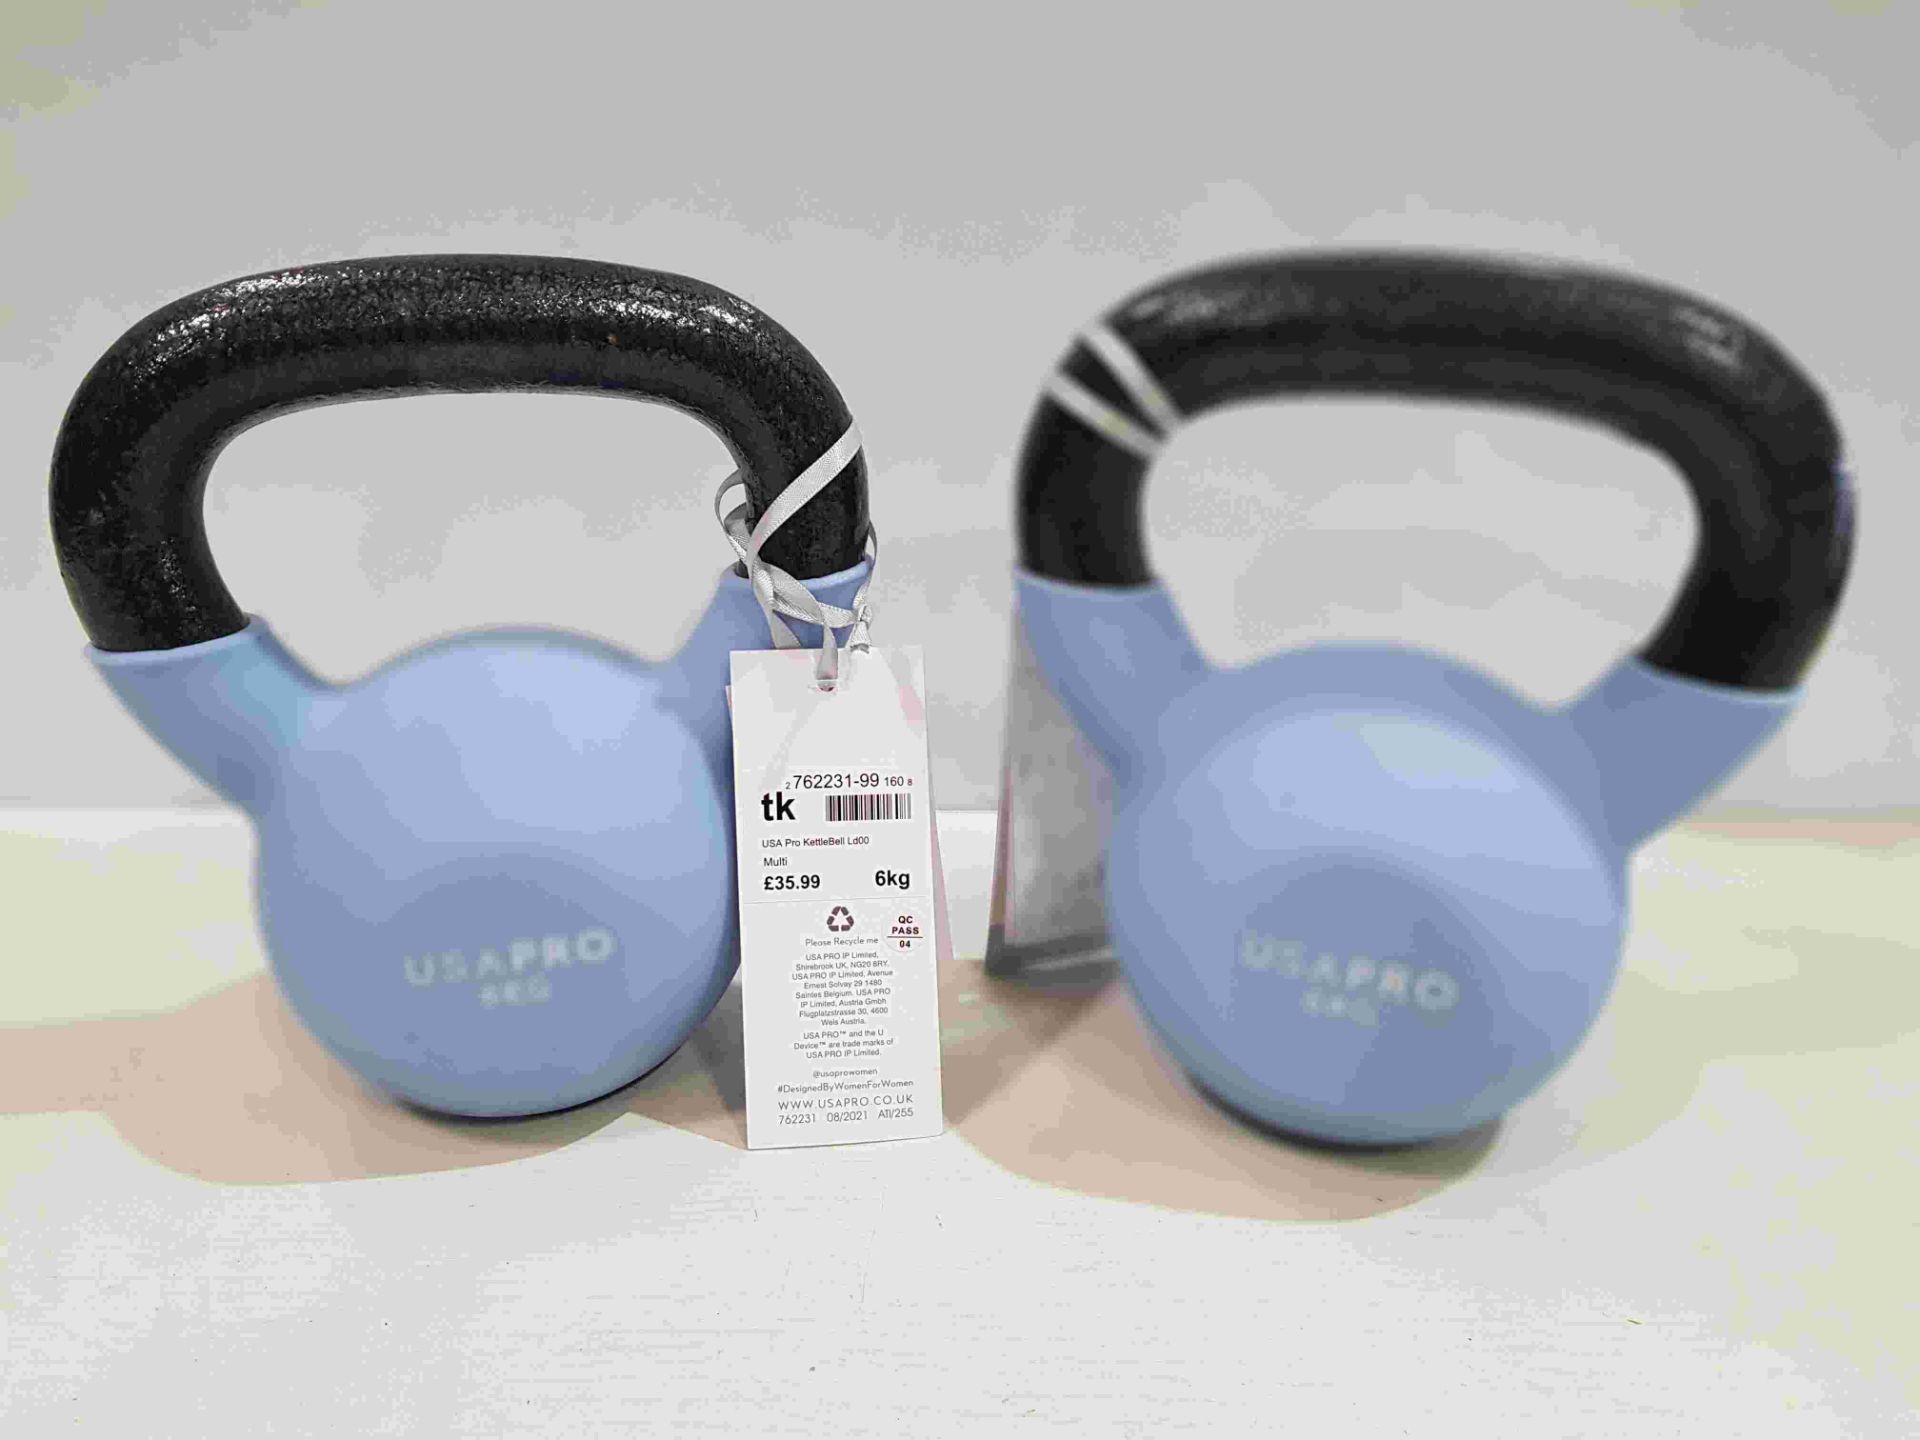 24 X BRAND NEW USA PRO 6 KG KETTLEBELLS ( 12 PAIRS ) - RRP £ 35.99 PP - £ TOTAL RRP £ 863.76 - IN 12